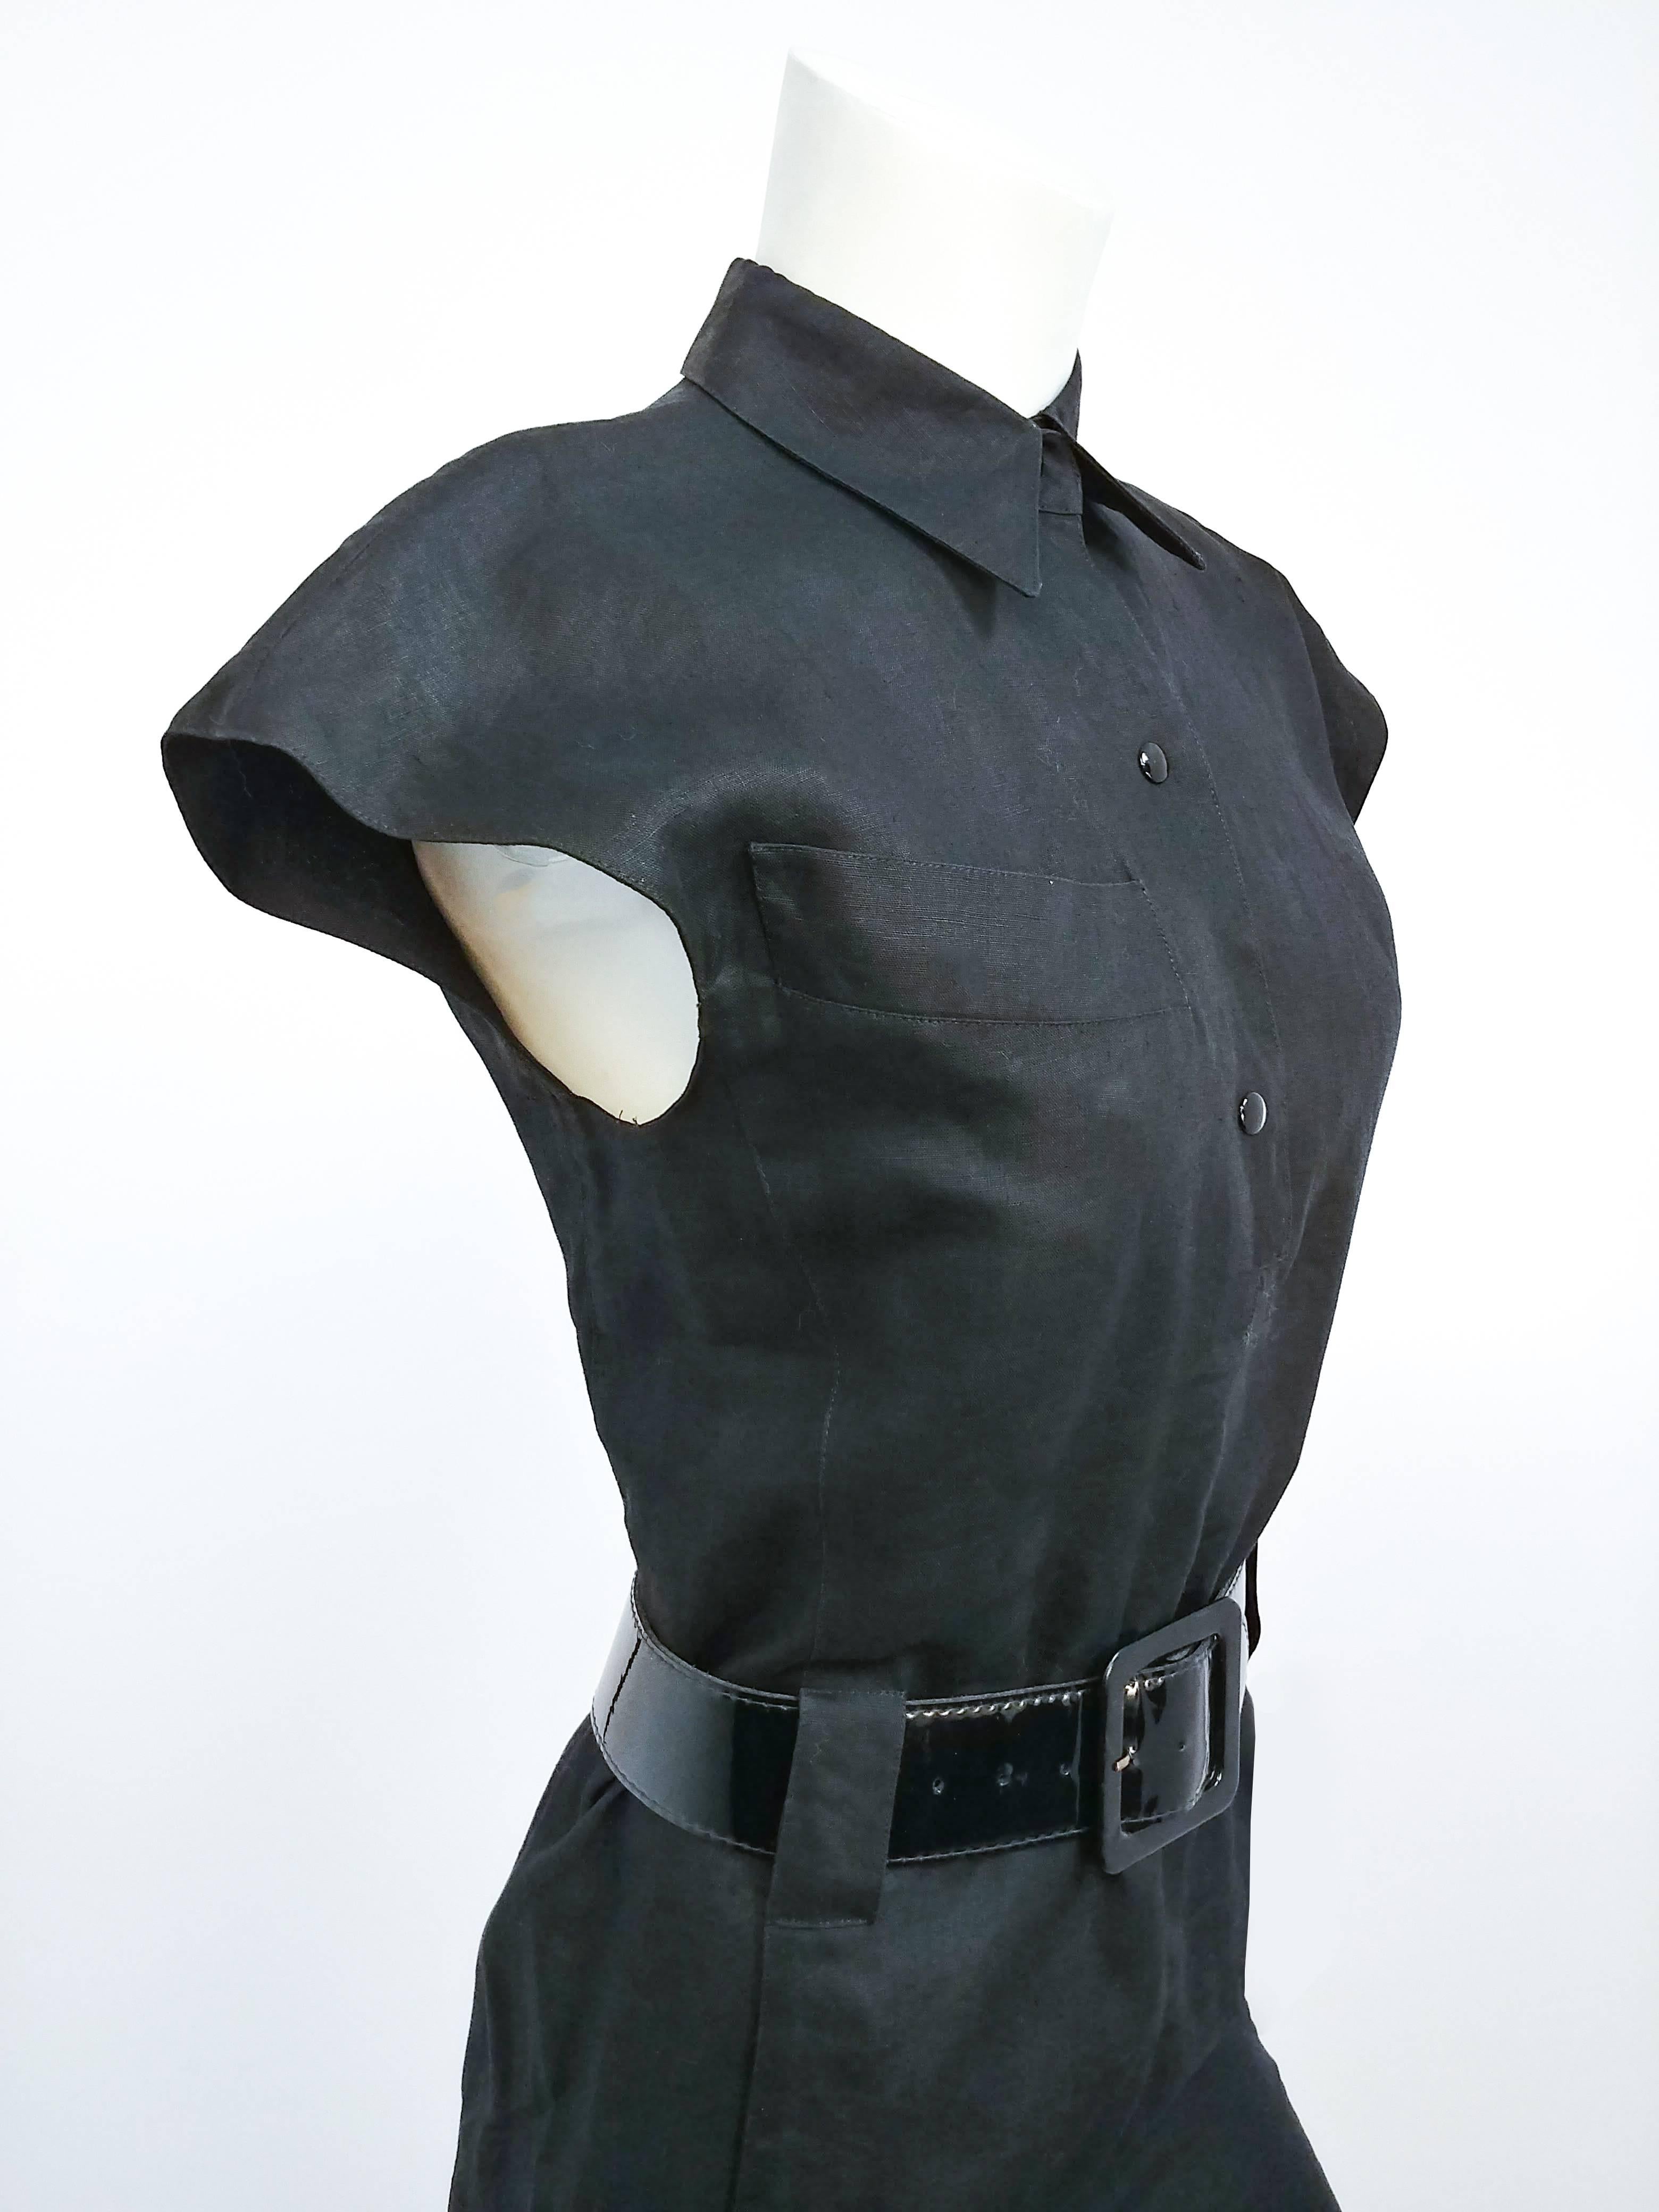 1980s Claude Montana Black Linen Shirtwaist Dress. Snap buttons at front, shirt collar, one front breast pocket. Wide patent leather belt. Dramatic pleated kick pleat. 